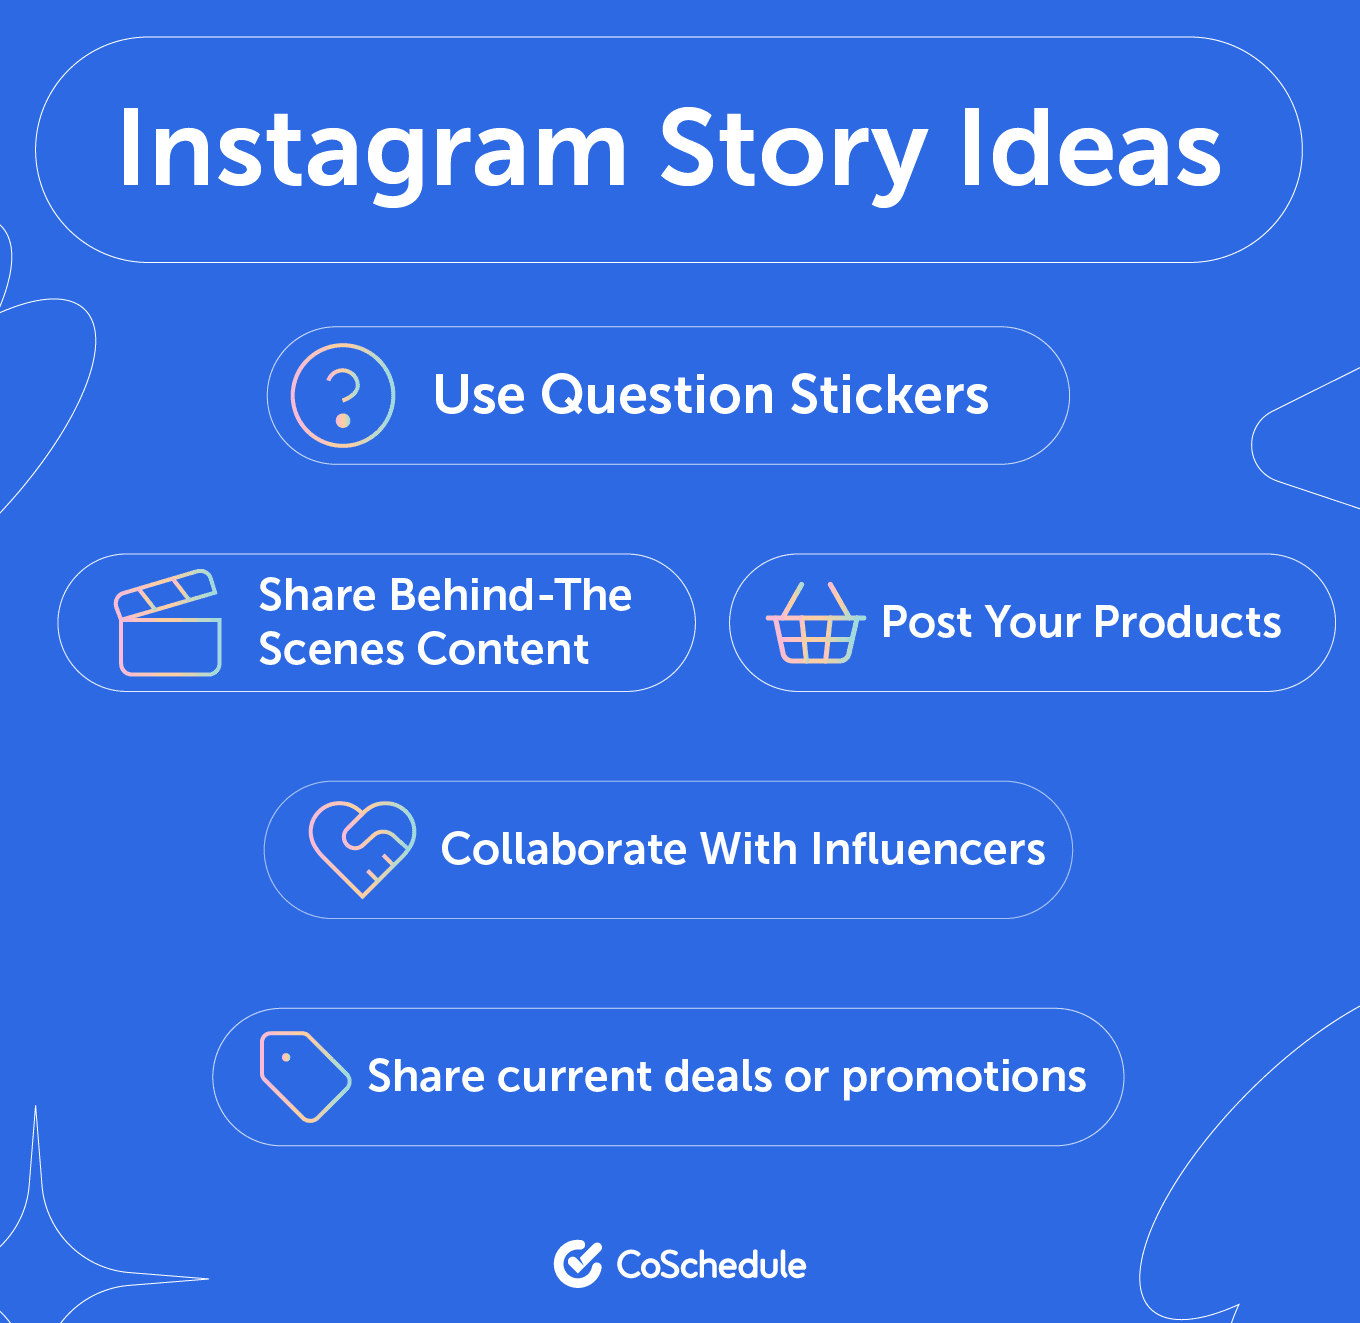 Instagram story ideas from CoSchedule